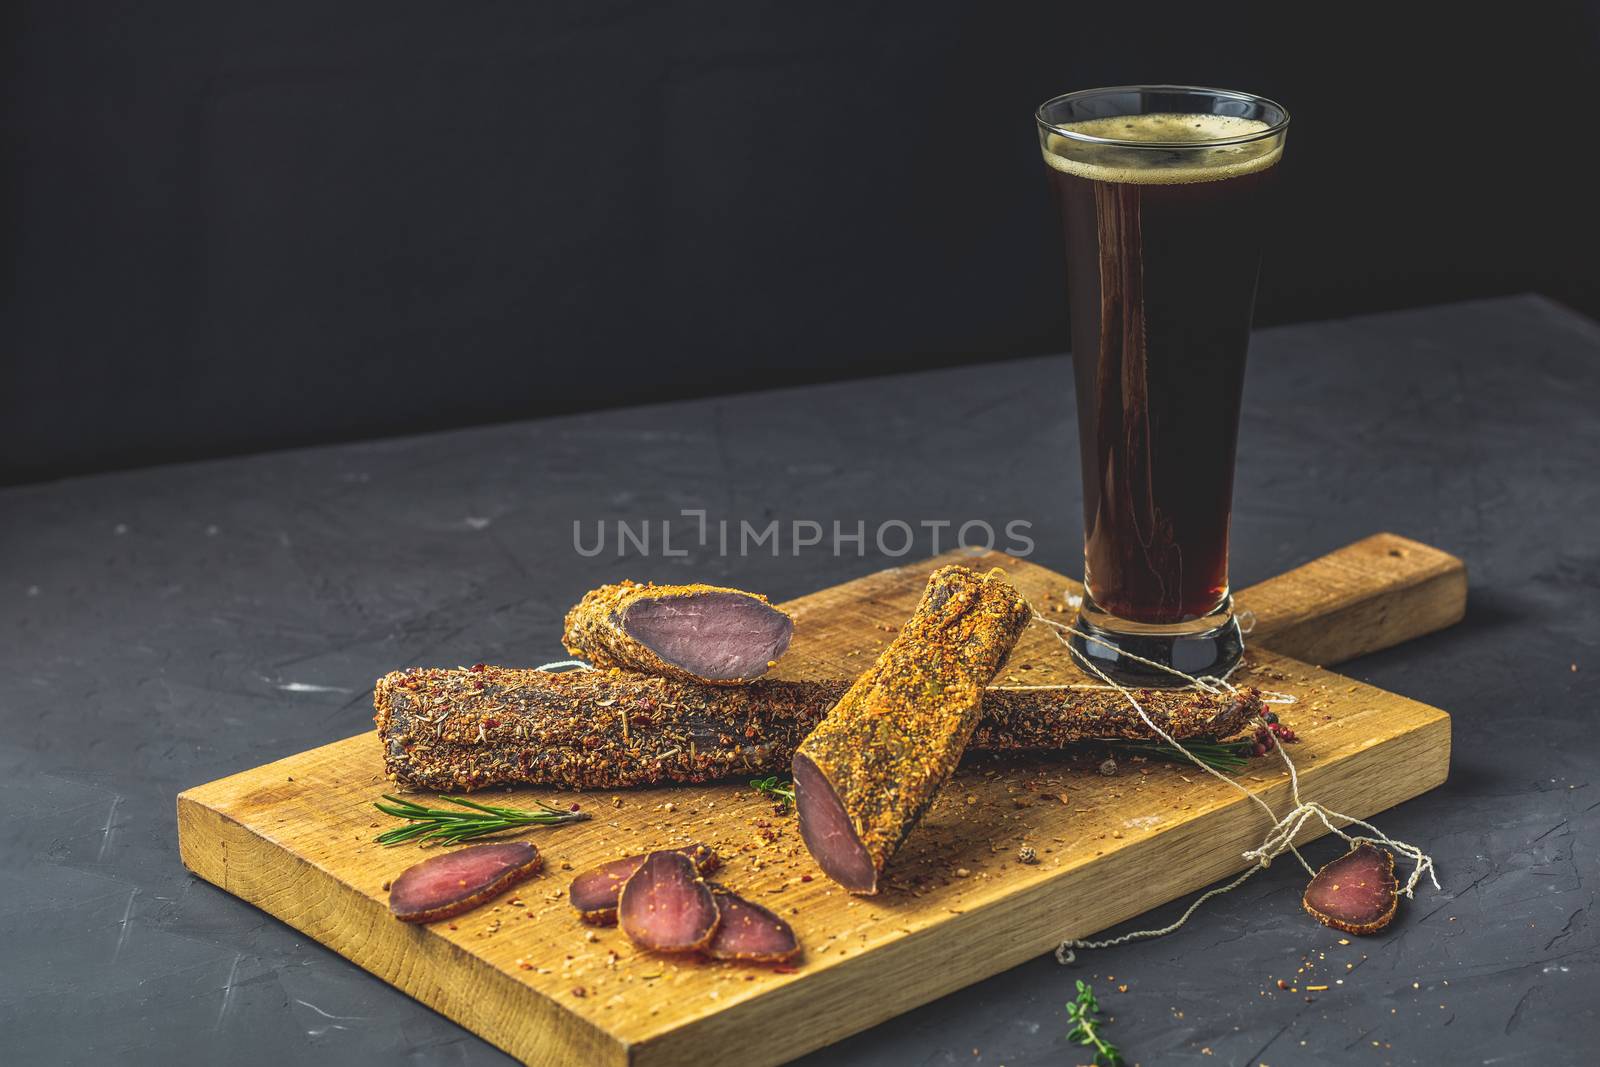 Dark beer in glass and Jerky, basturma, dried meat beef, meat smoked jerky with spices on wooden cutting board, black concrete surface table background.